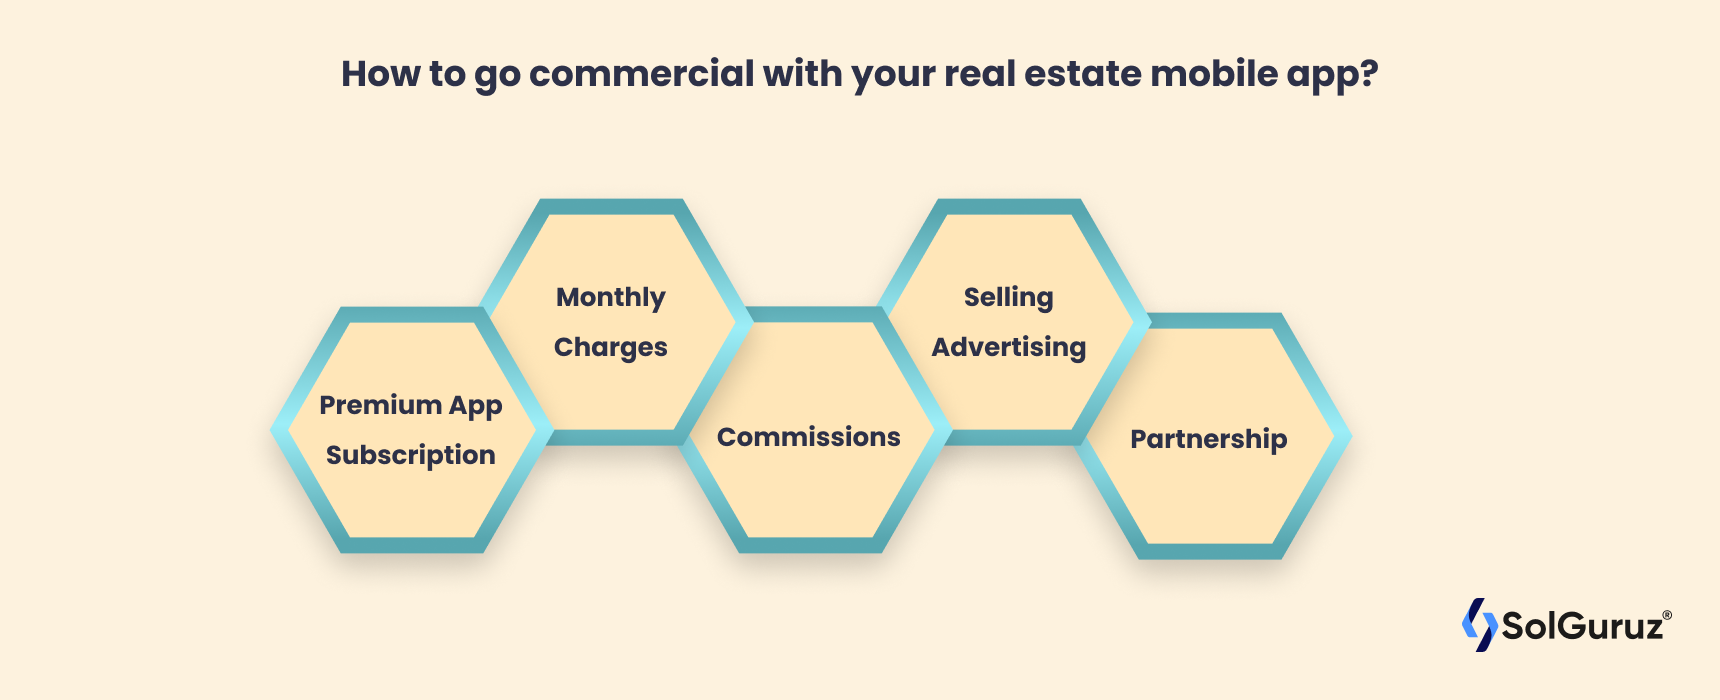 How to go commercial with your real estate mobile app?